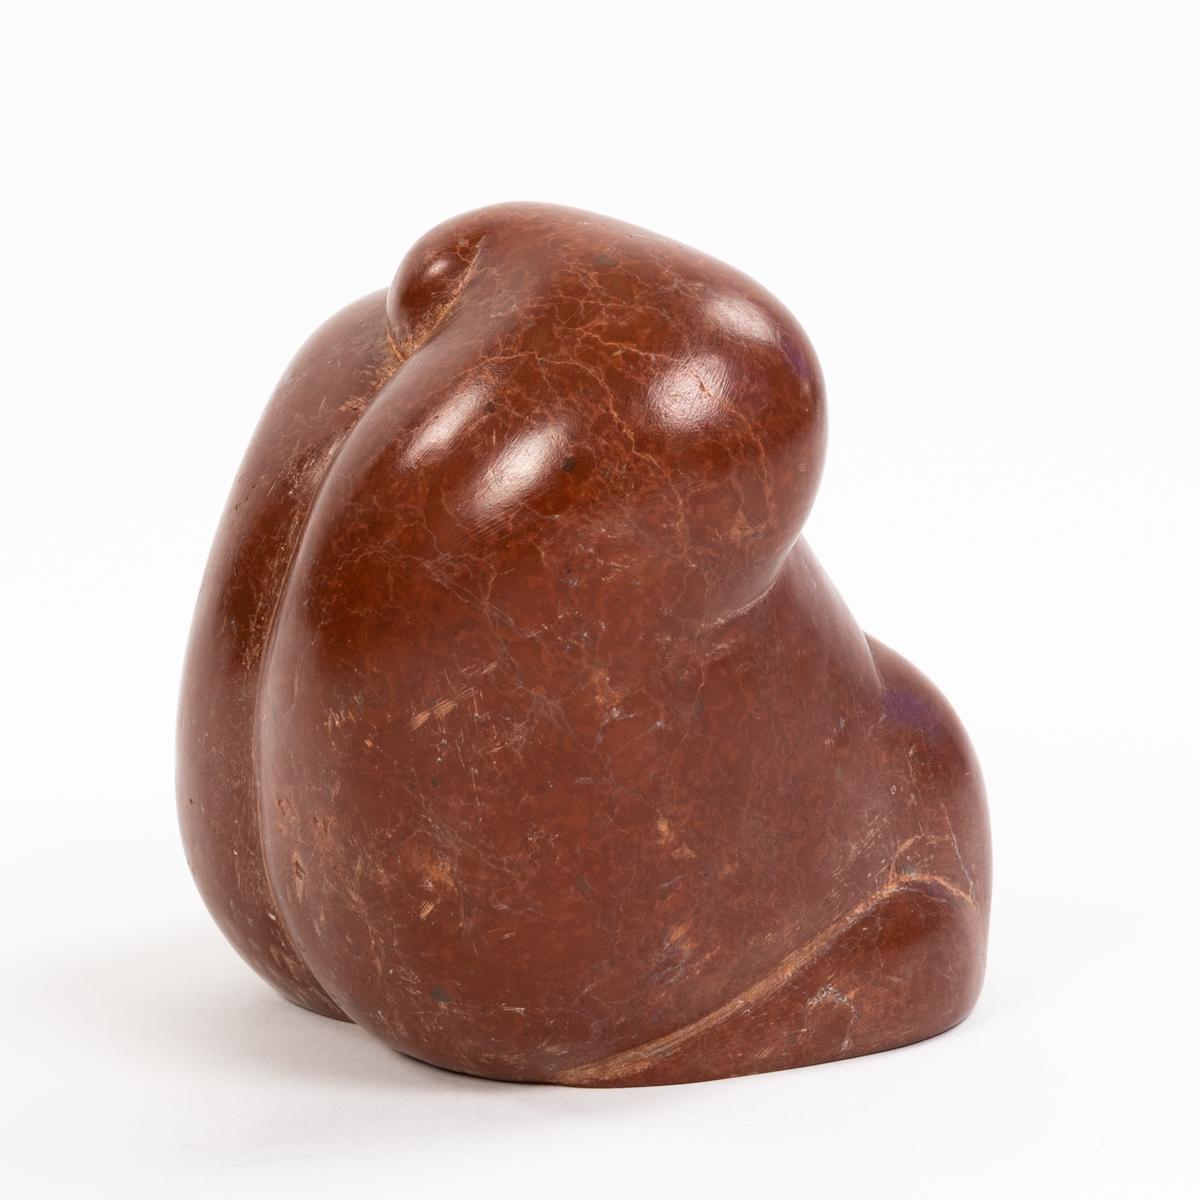 Hand-Crafted Cubistic French Midcentury Sculpture in Brown-Red Stone, Signed M.Z. 1981 For Sale